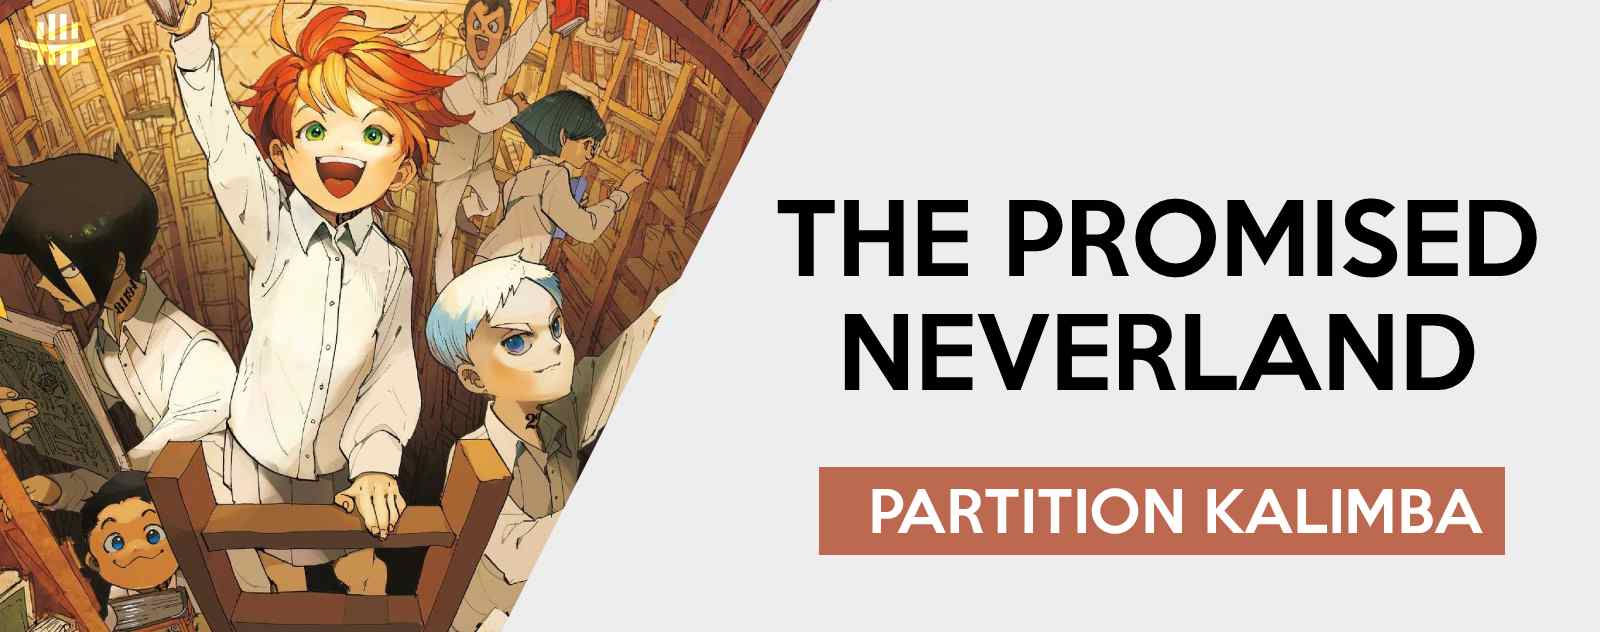 The Promised Neverland | partition kalimba